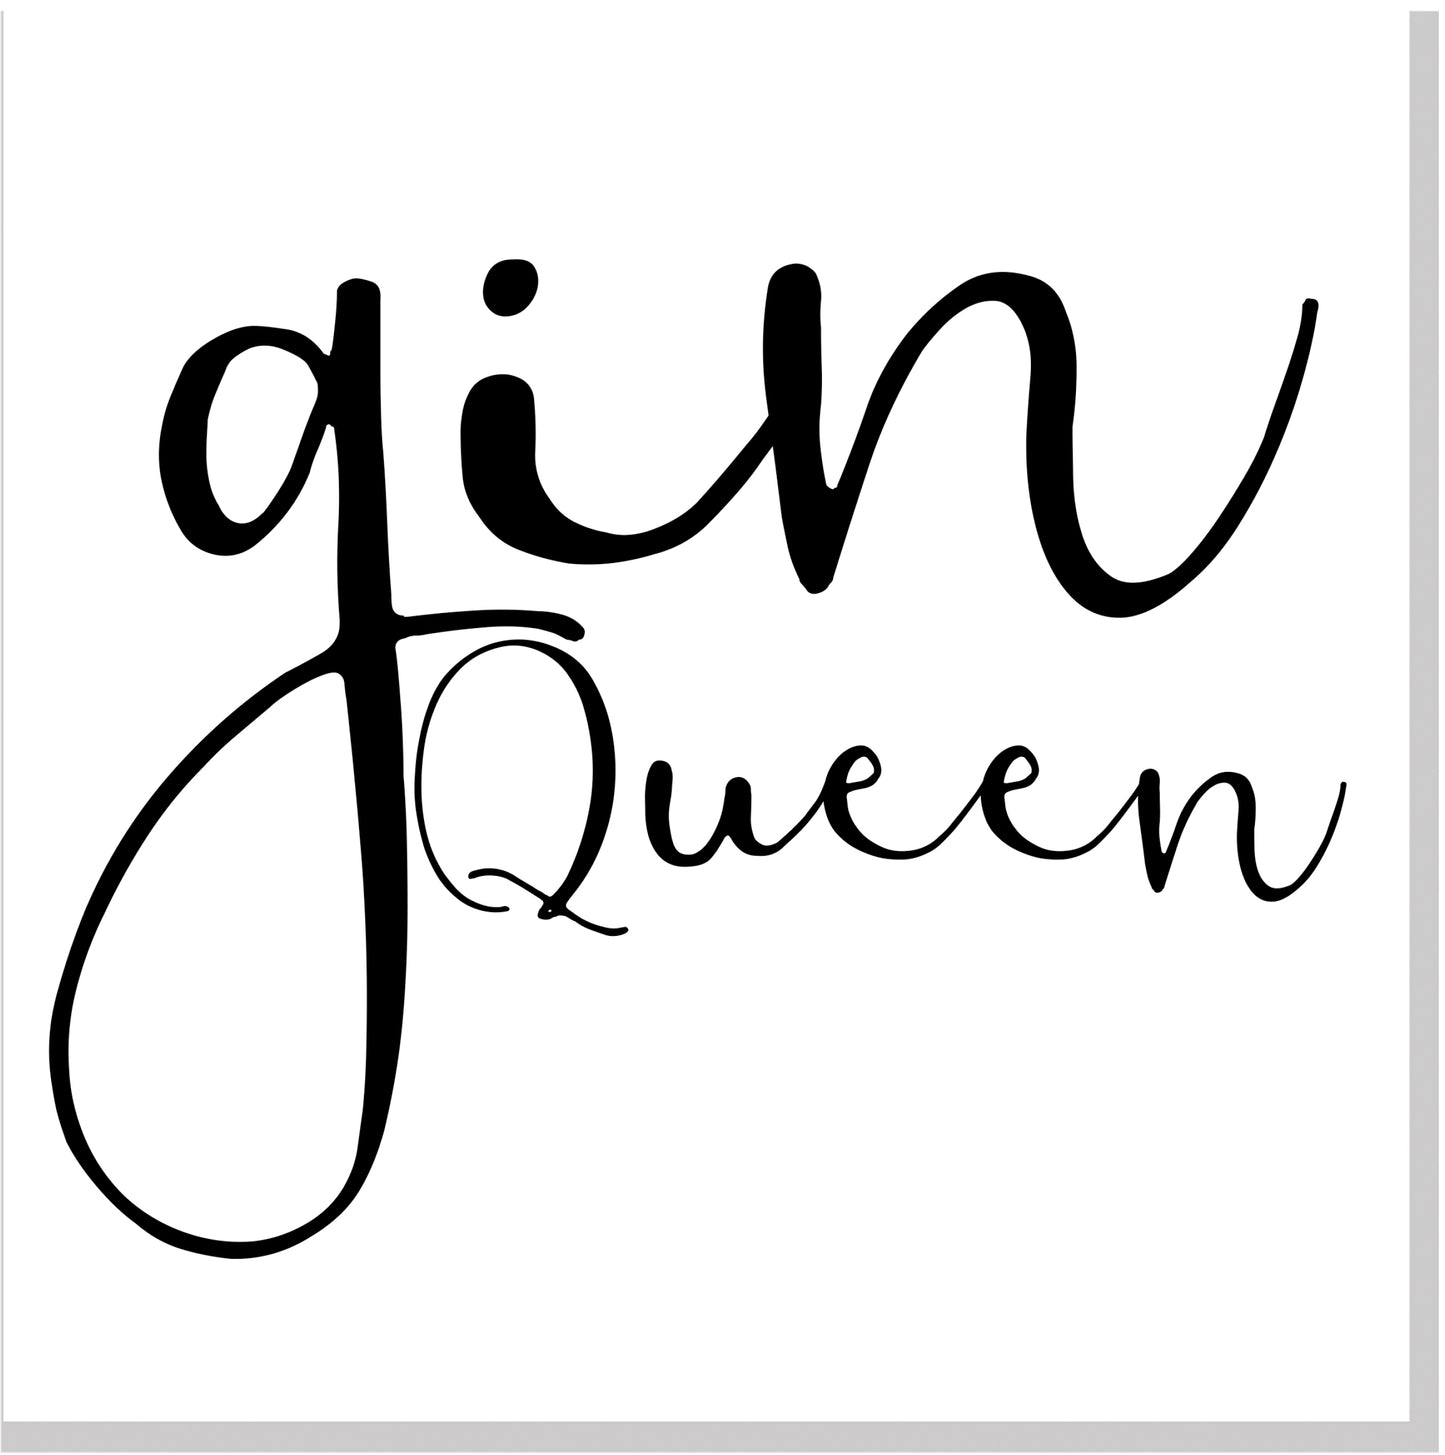 Gin Queen square card